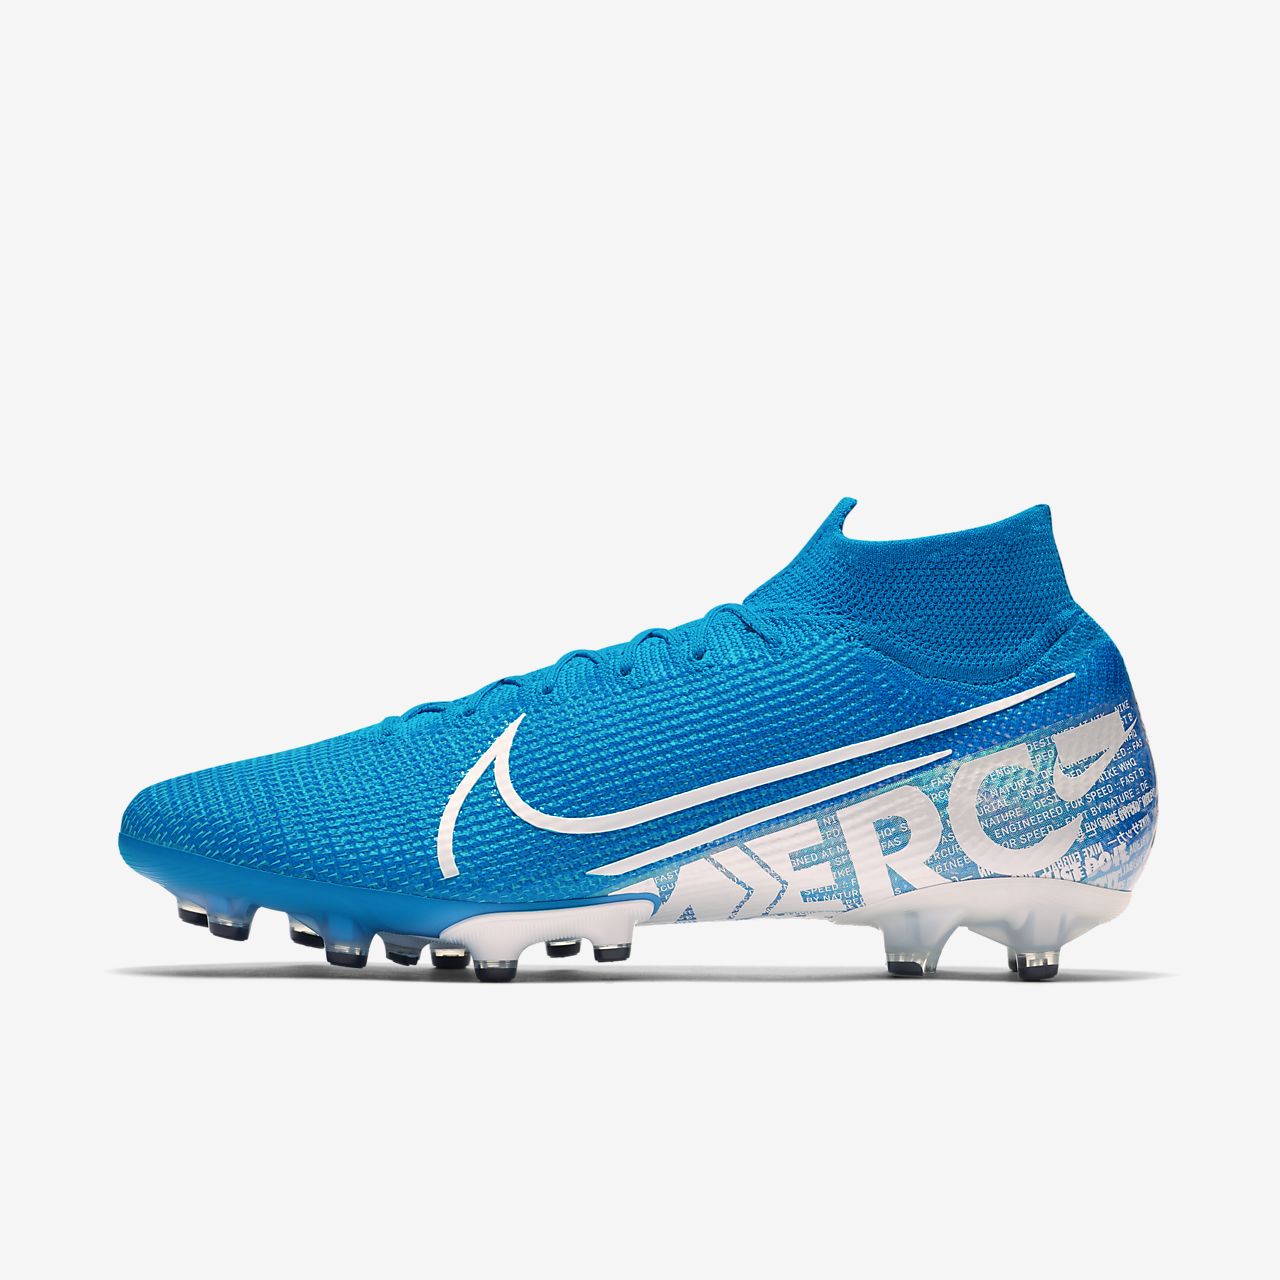 Nike Mercurial Superfly 7 Pro MDS AG PRO Football boots.